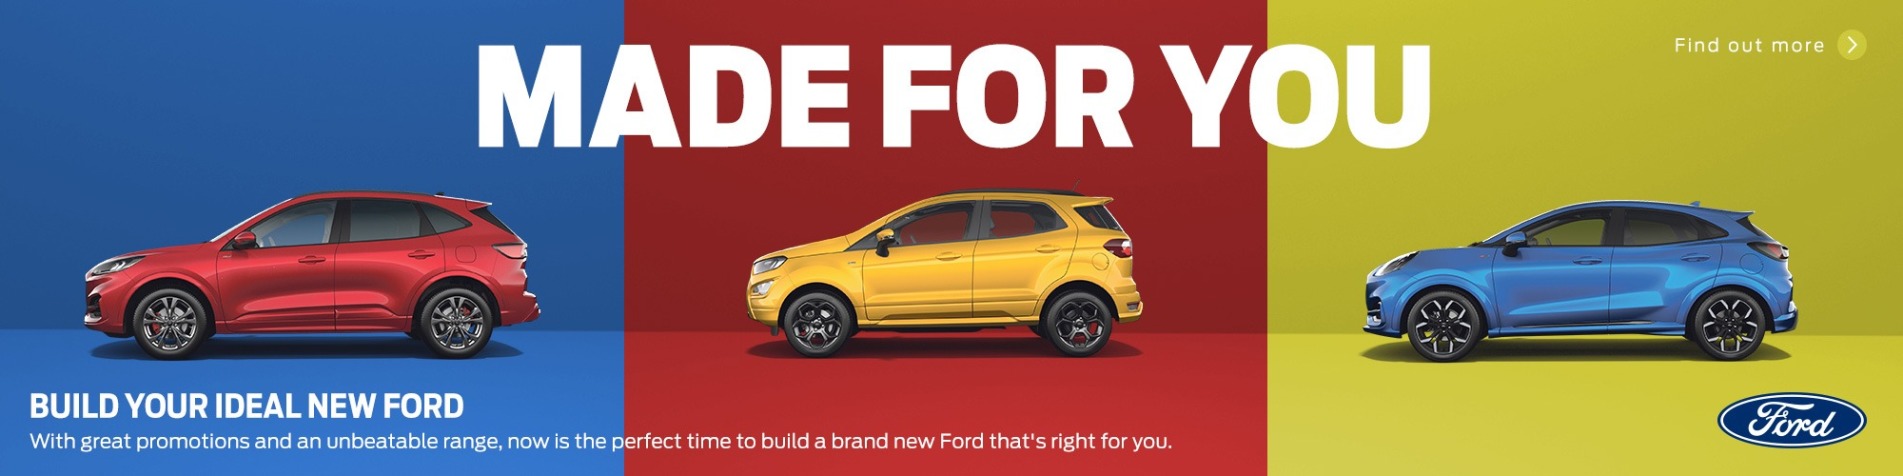 Ford made for you banner